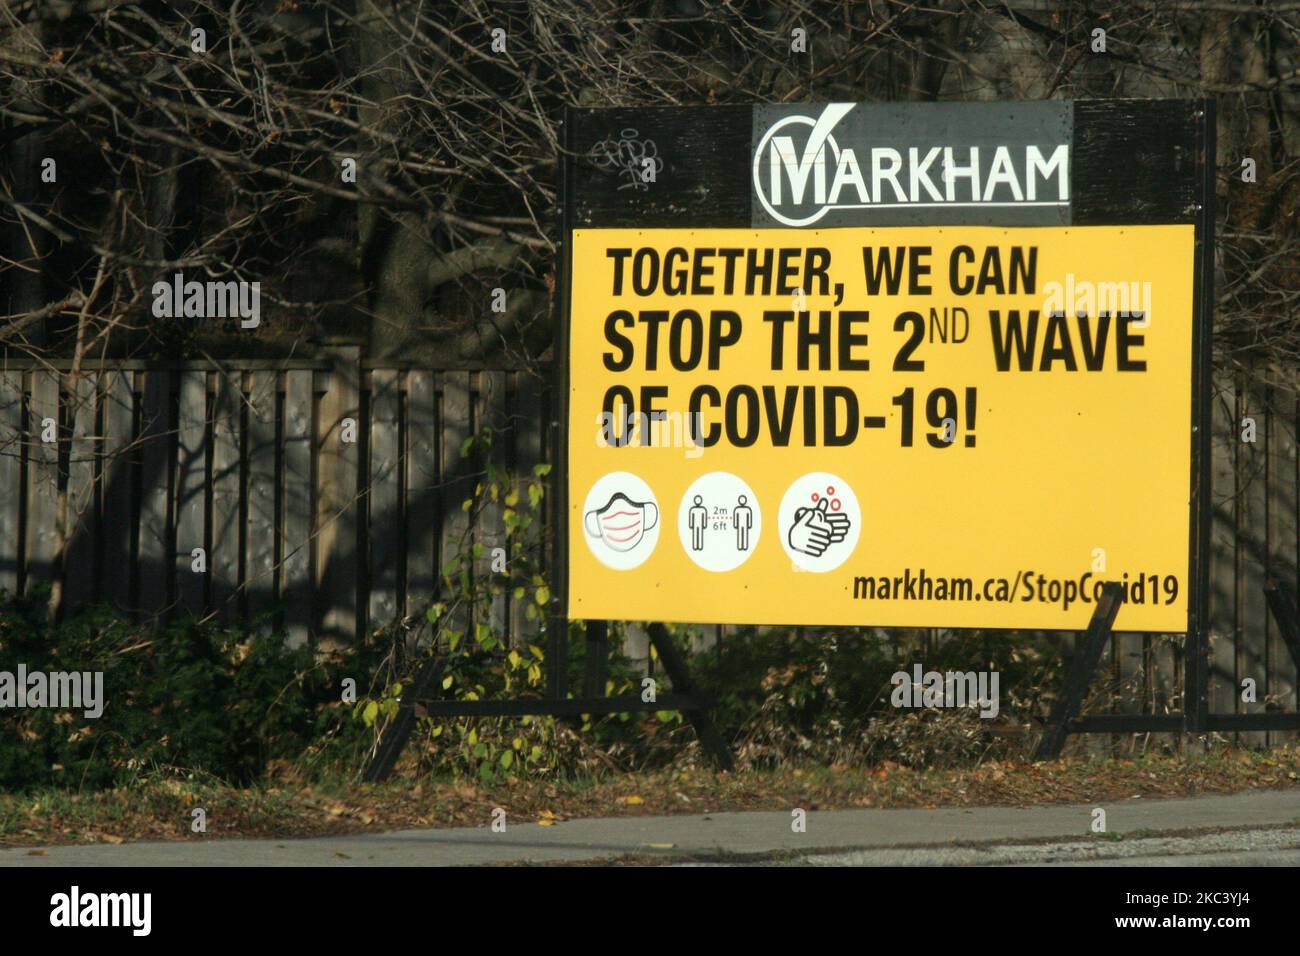 Sign urging people to do what they can to stop the second wave of the novel coronavirus (COVID-19) in Markham, Ontario, Canada on November 12, 2020. Ontario reported 1,575 new COVID-19 cases today and 18 more deaths, setting a new single-day record for daily cases reported in a 24-hour period since the start of the pandemic. New modeling projections warn that Ontario could see 6,500 daily cases of COVID-19 by mid-December. The projections also suggest that the number of COVID-19 patients in intensive care units will exceed the 150 threshold within two weeks, overwhelming some hospitals and for Stock Photo